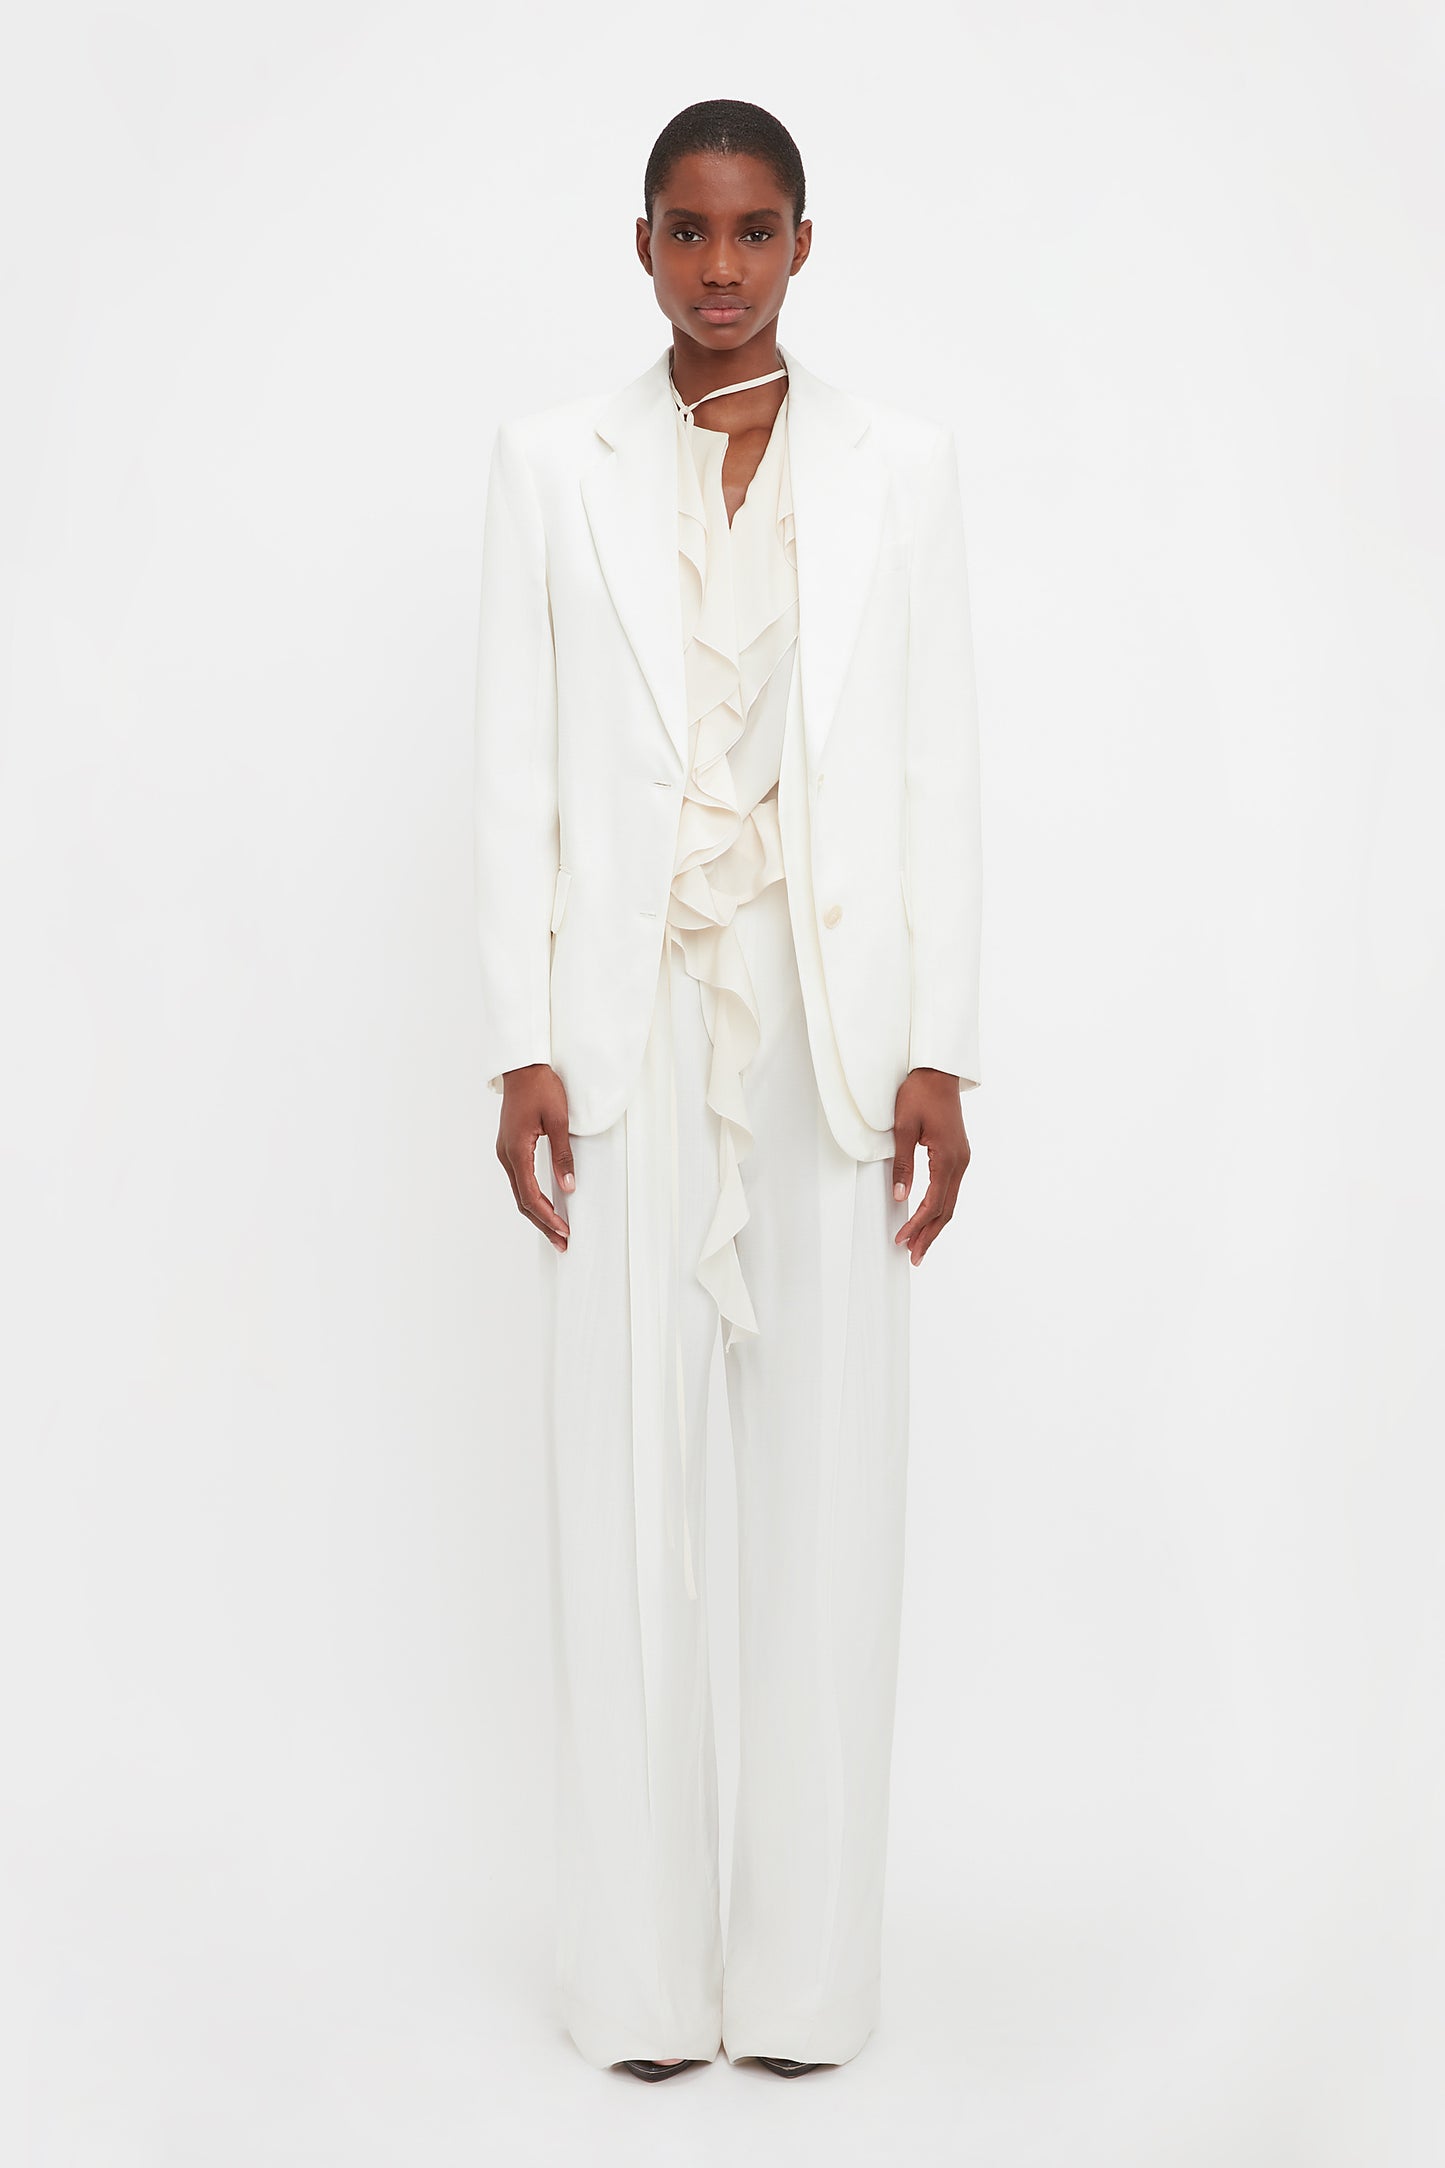 Model wears the asymmetric jacket in white from VB. This white blazer is a single breasted jacket with an asymmetric hemline and double layer detail. 